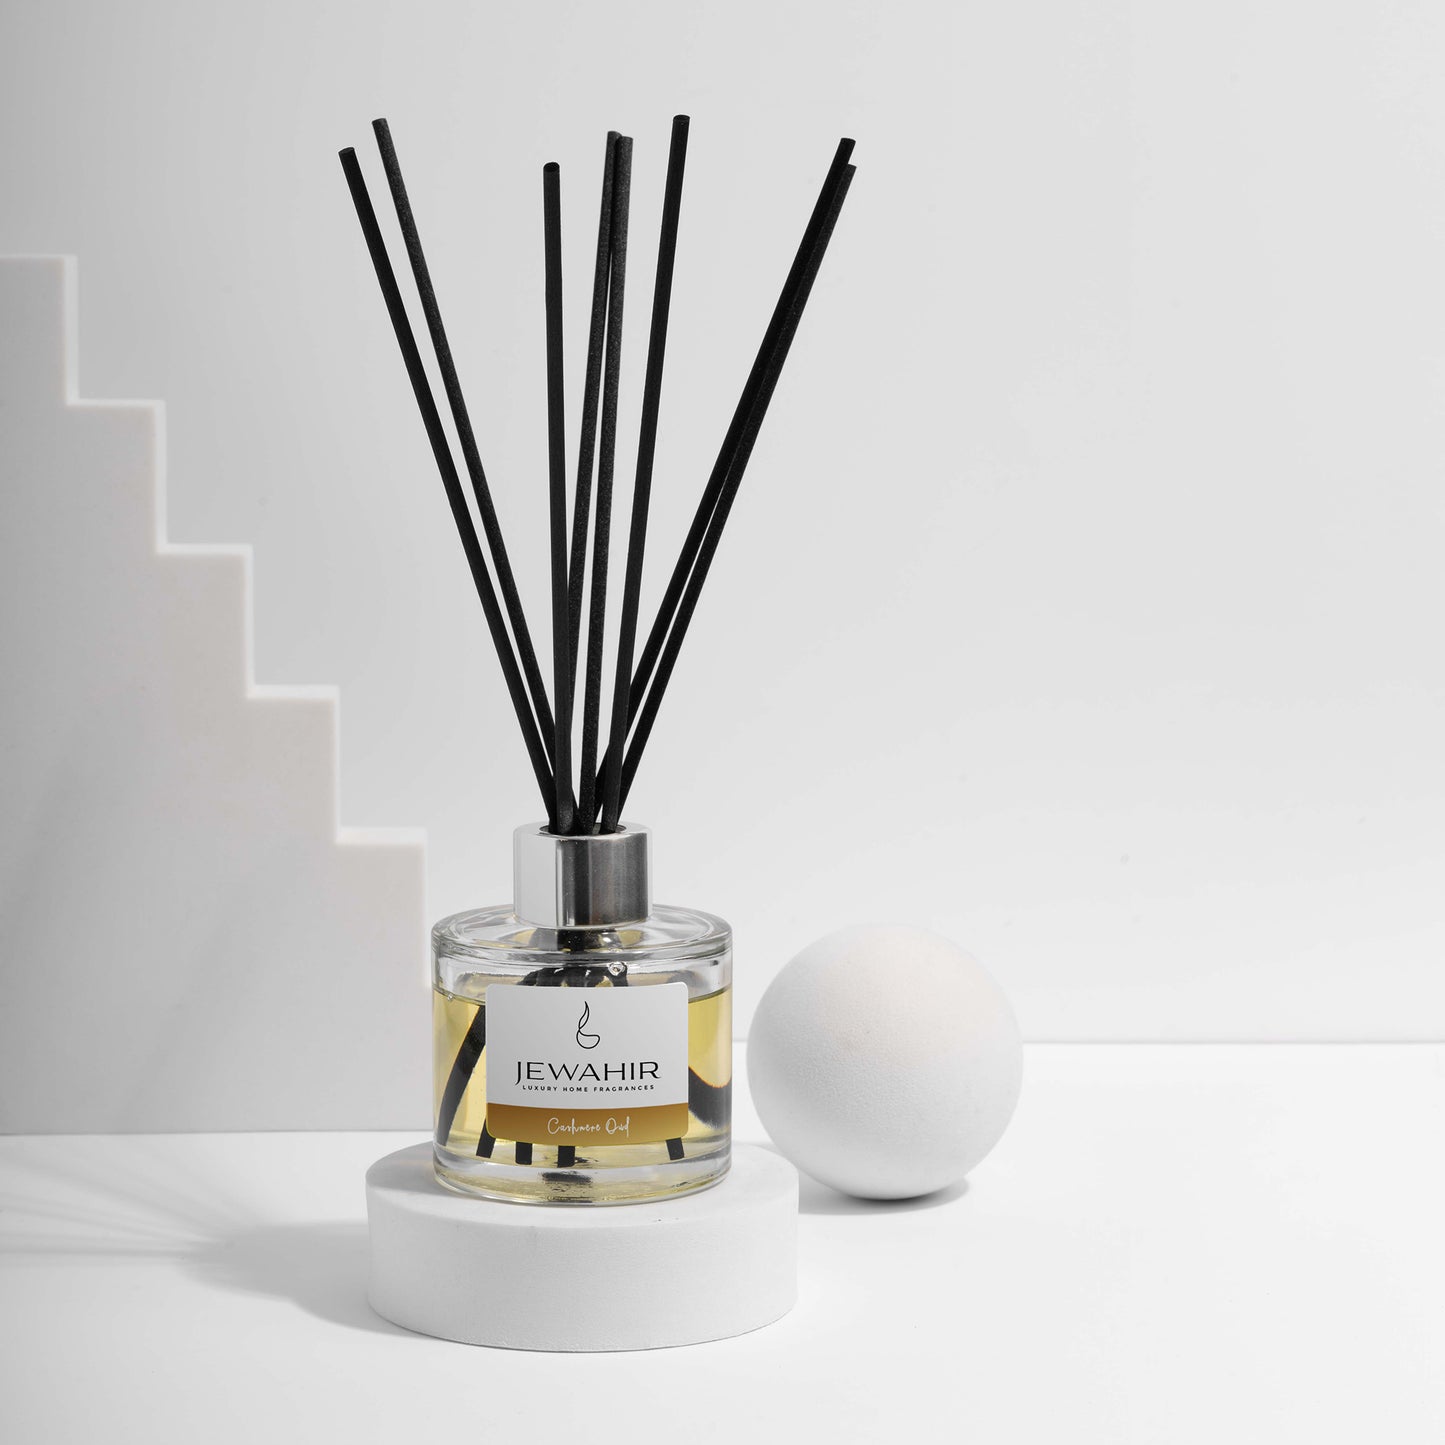 Cashmere Oud Reed Diffuser